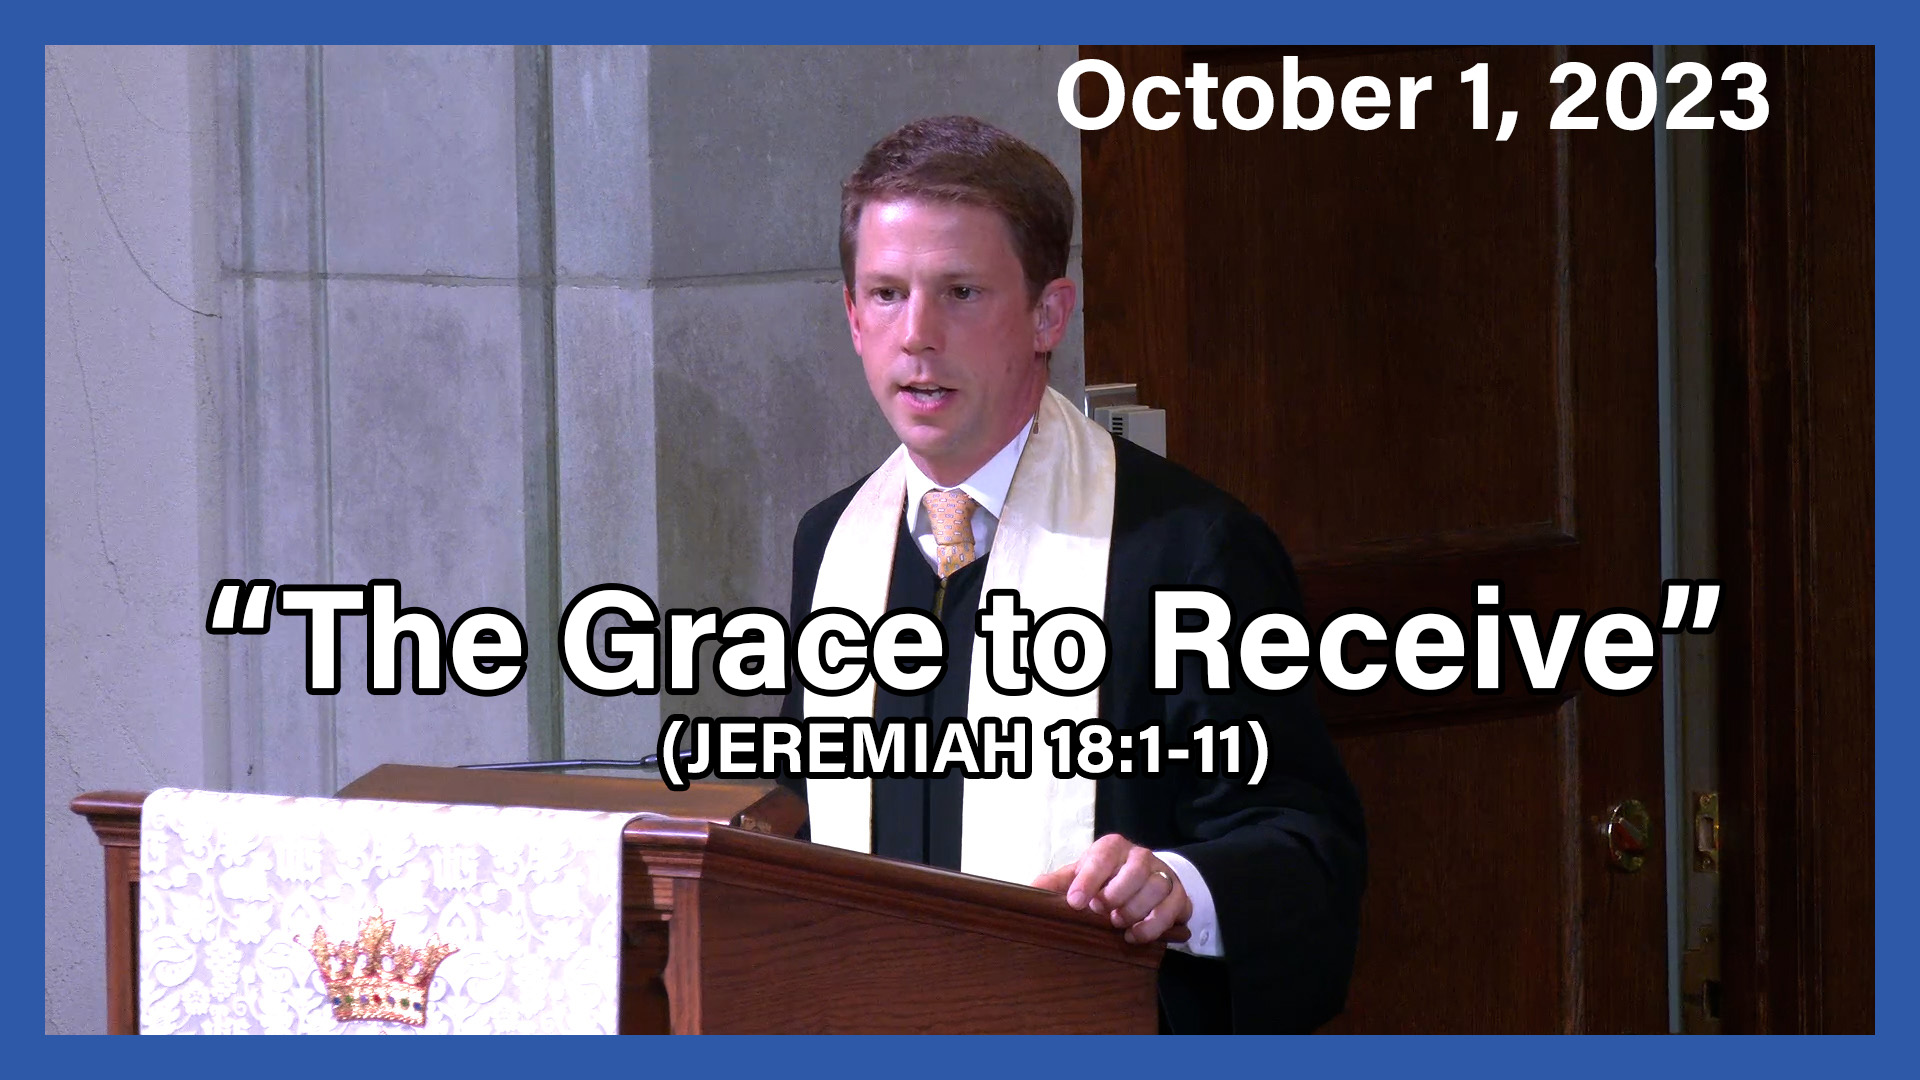 October 1 - The Grace to Receive